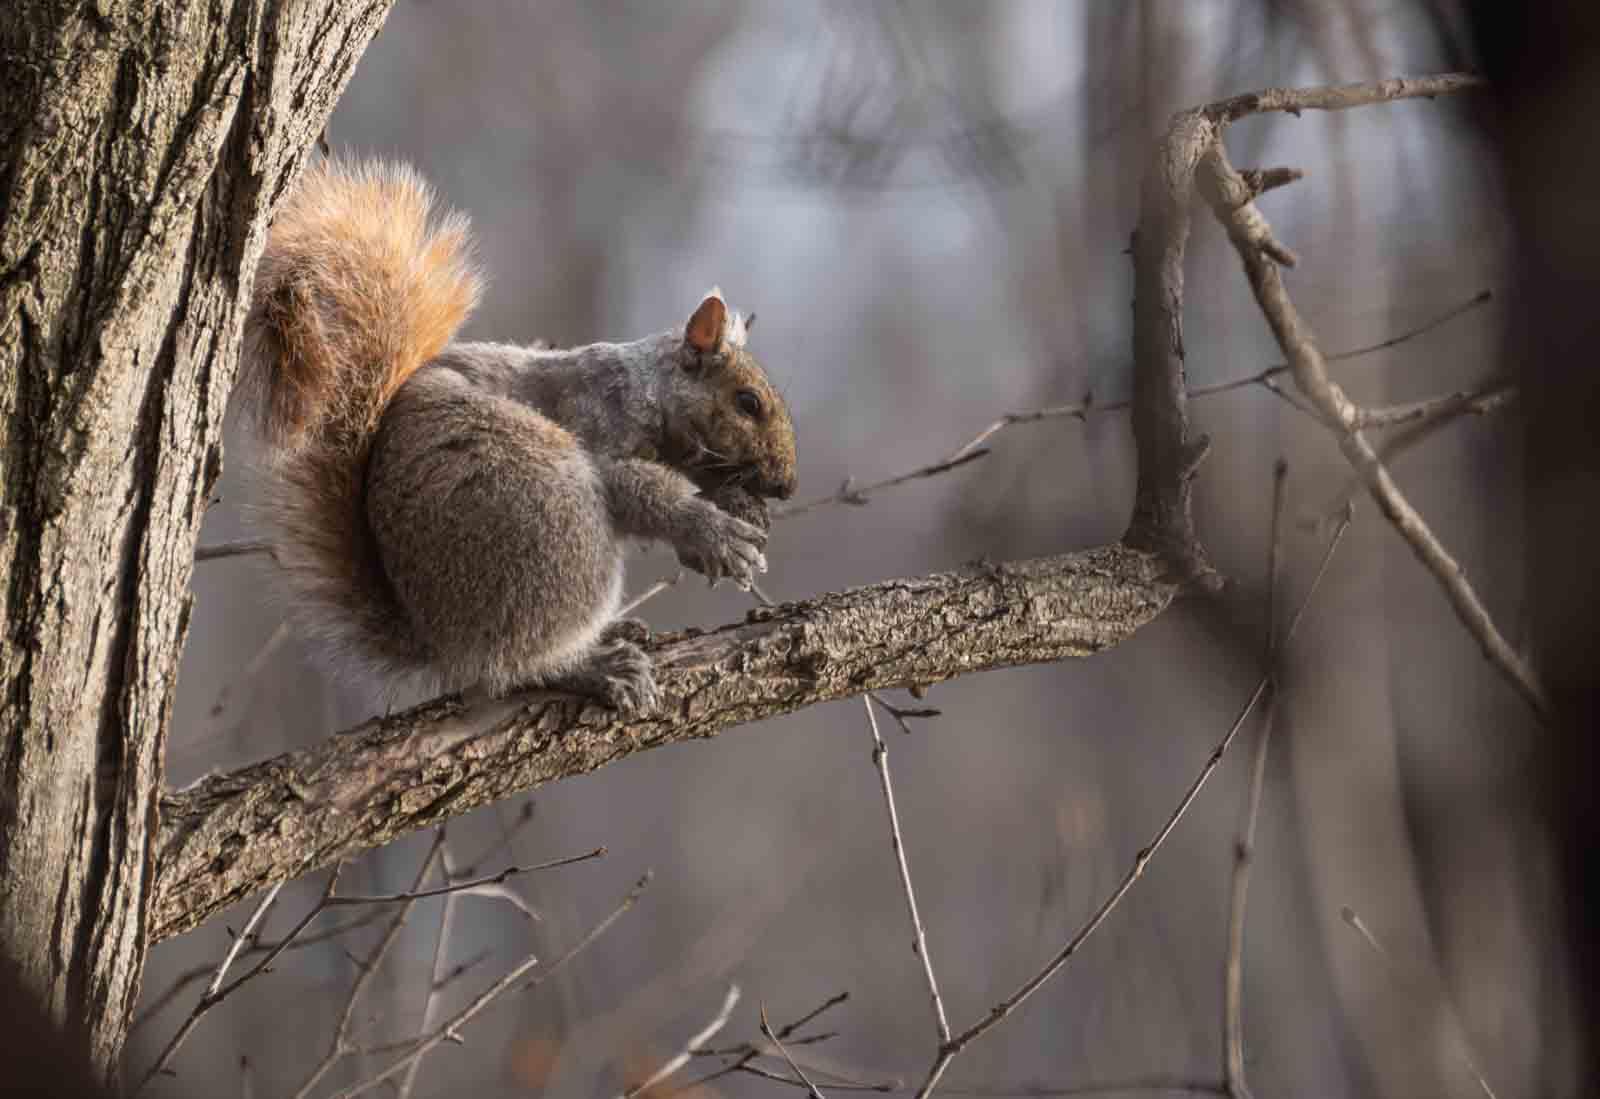 A gray squirrel clutches an acorn as it sits on a branch along the trail near Warch Campus Center.